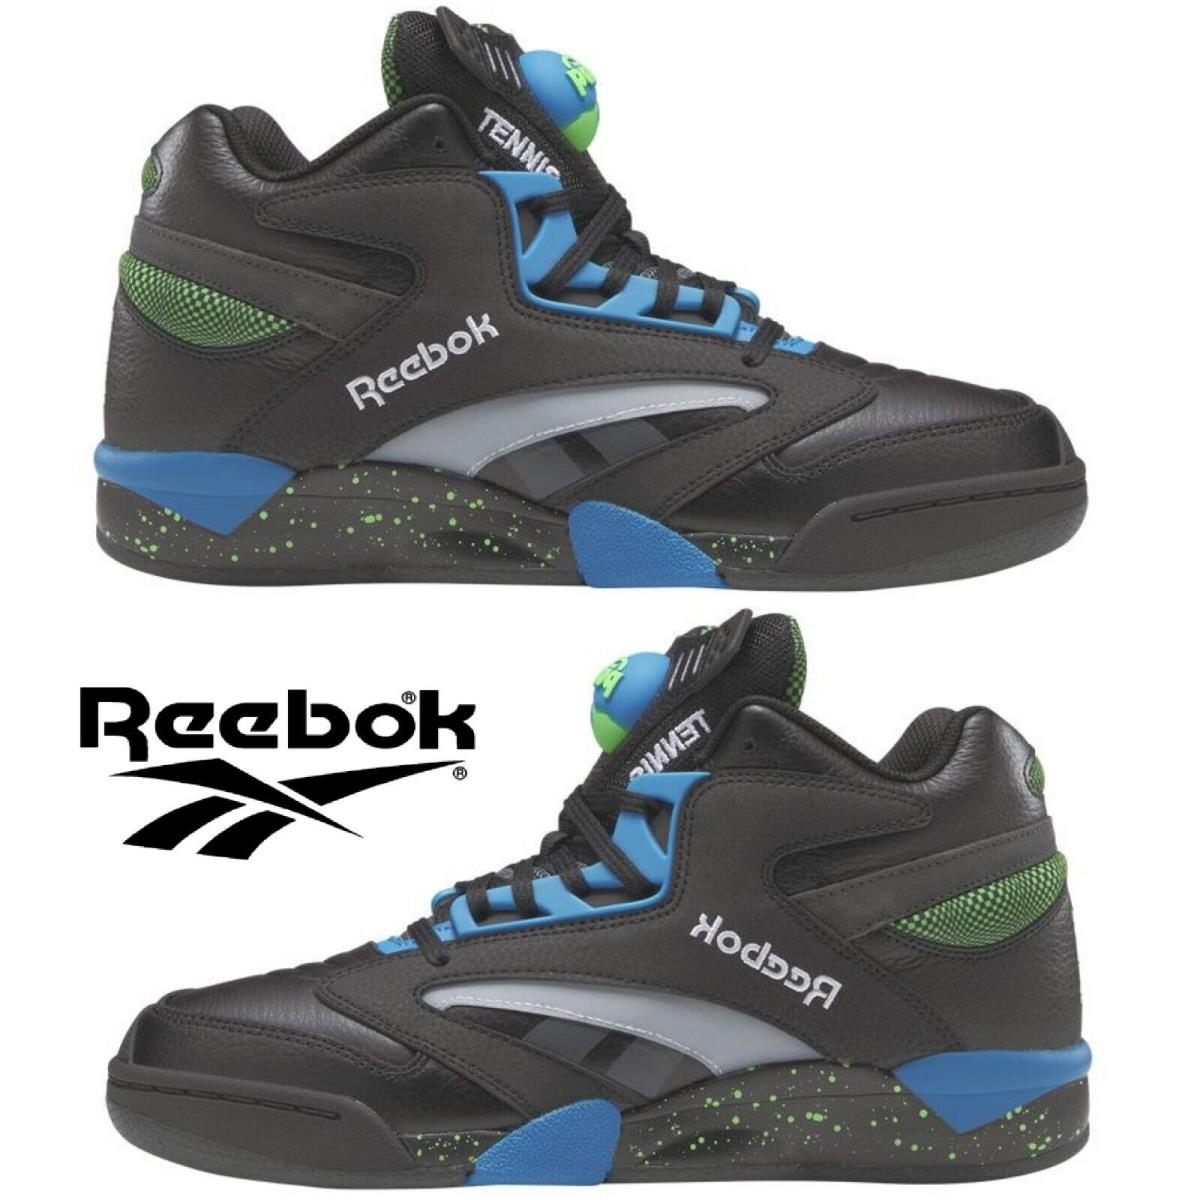 Reebok Shaq Victory Basketball Shoes Men`s Sneakers Running Casual Sport